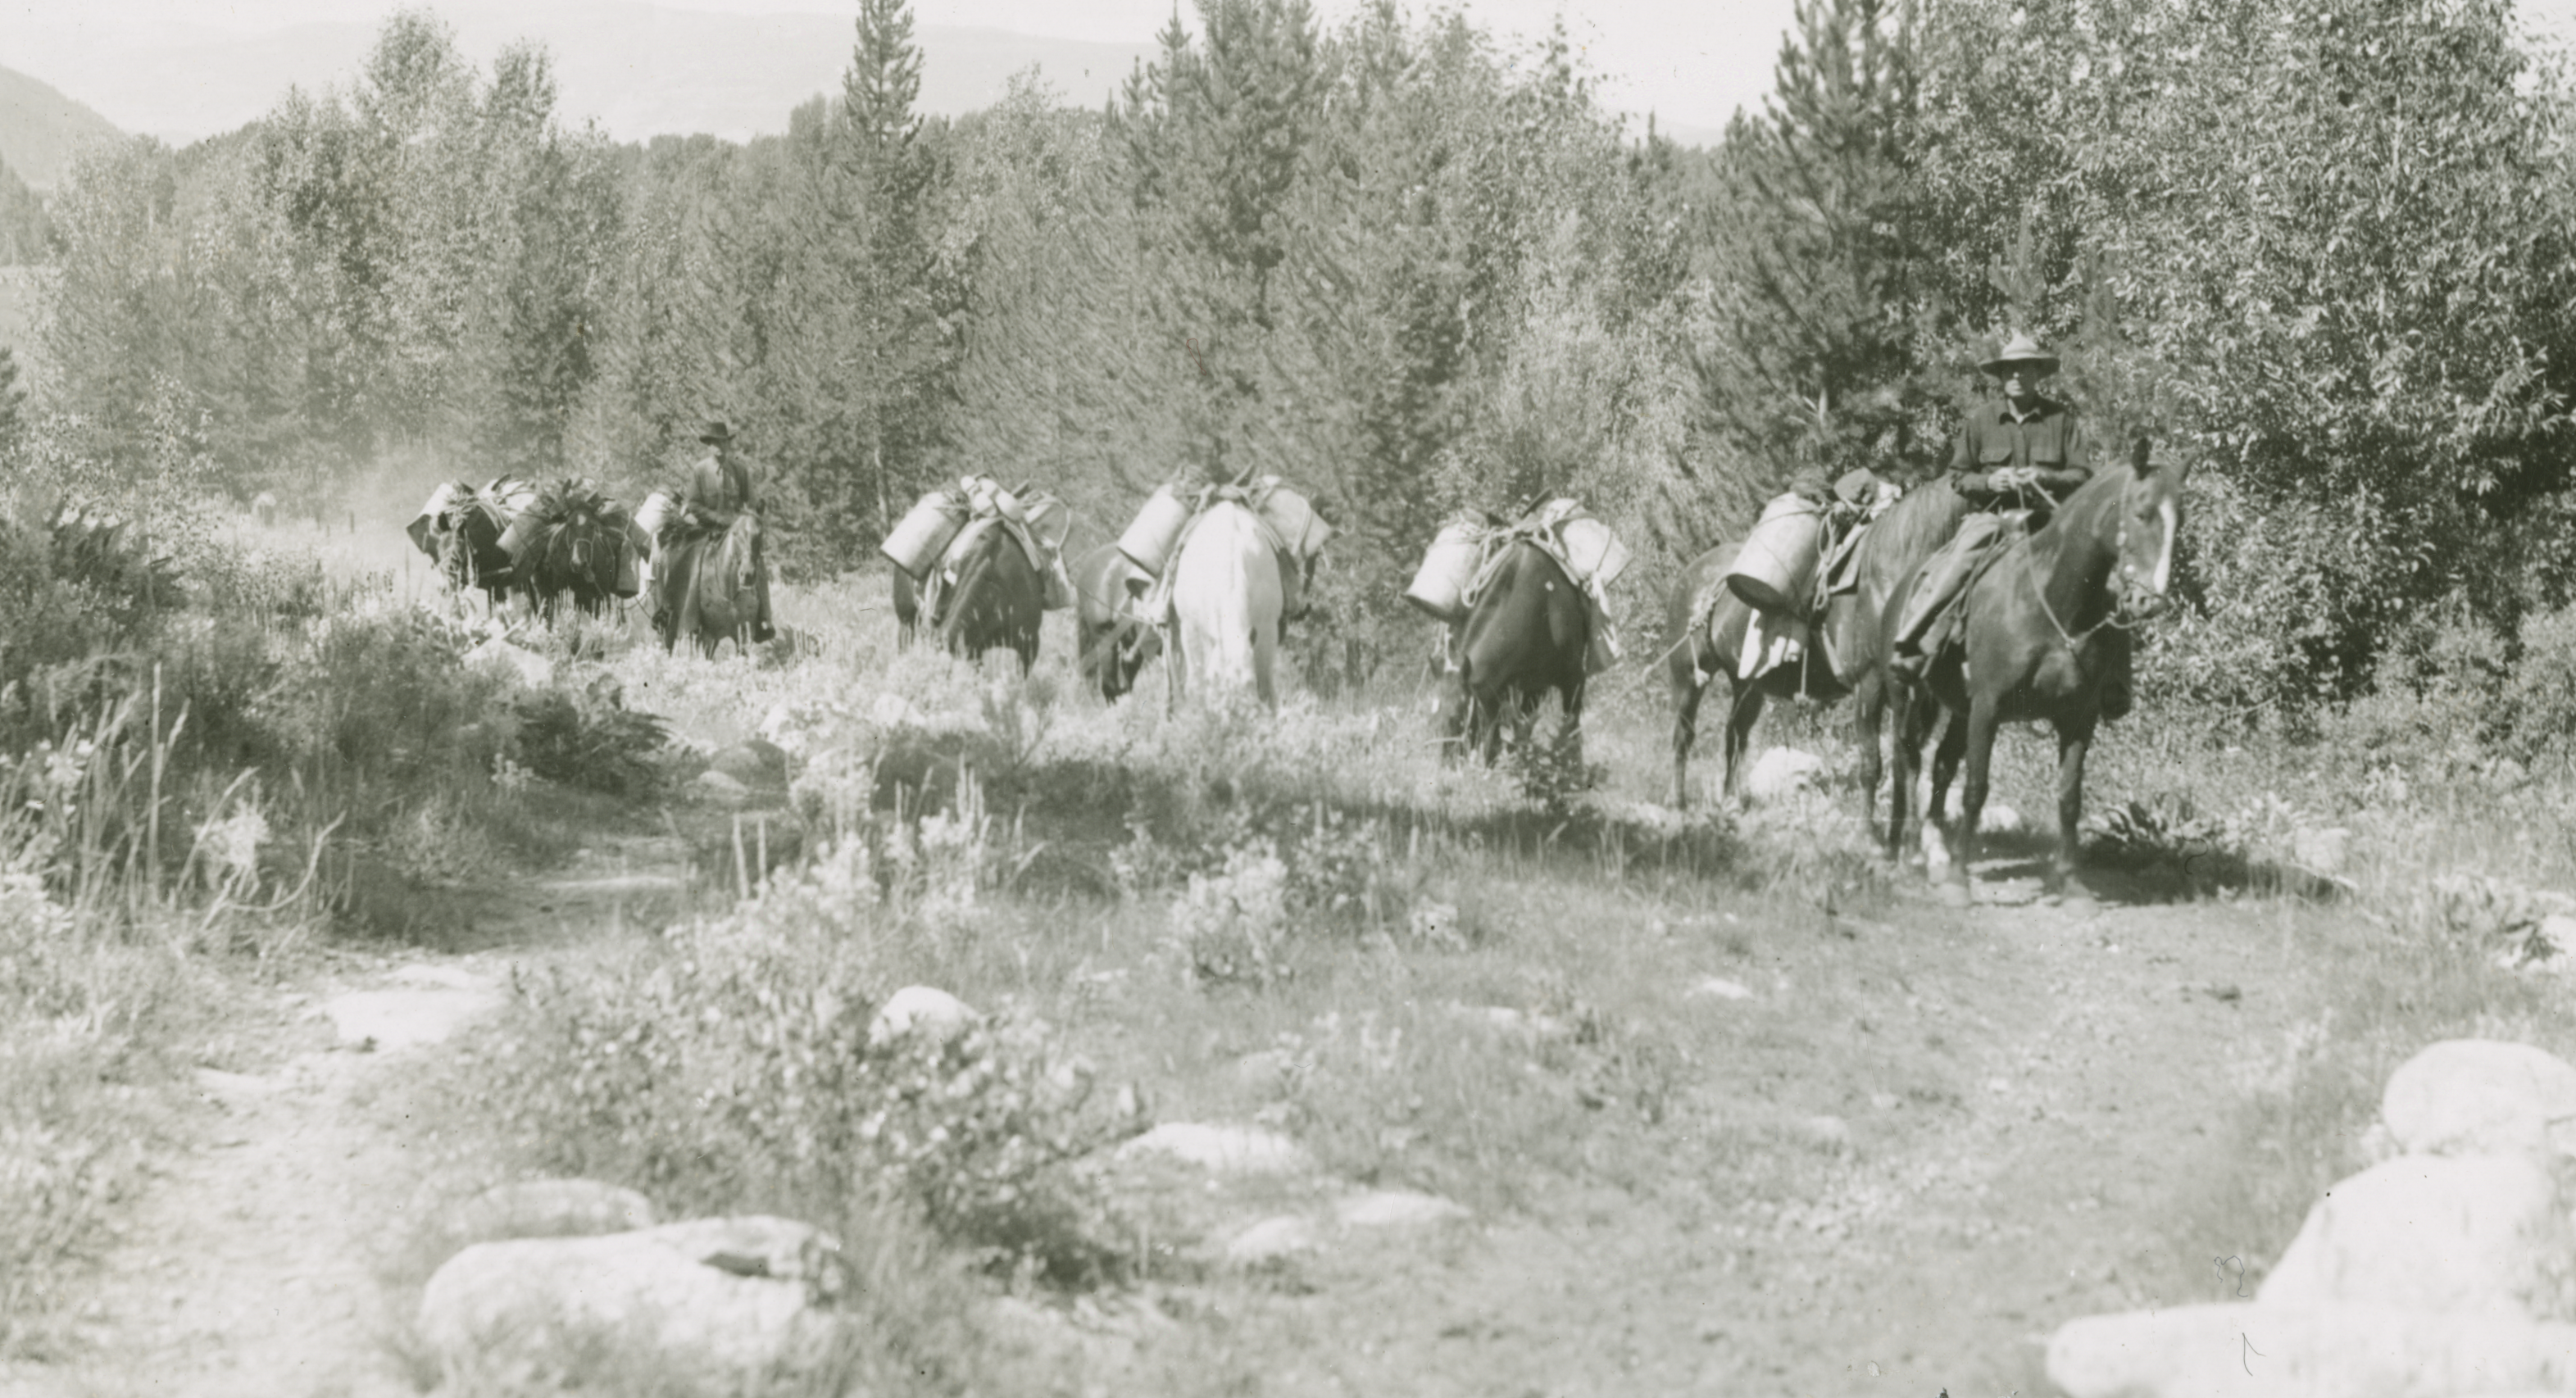 Two men on horses ride along a dirt trail with five other horses that carry milk cans strapped to their pack saddles.